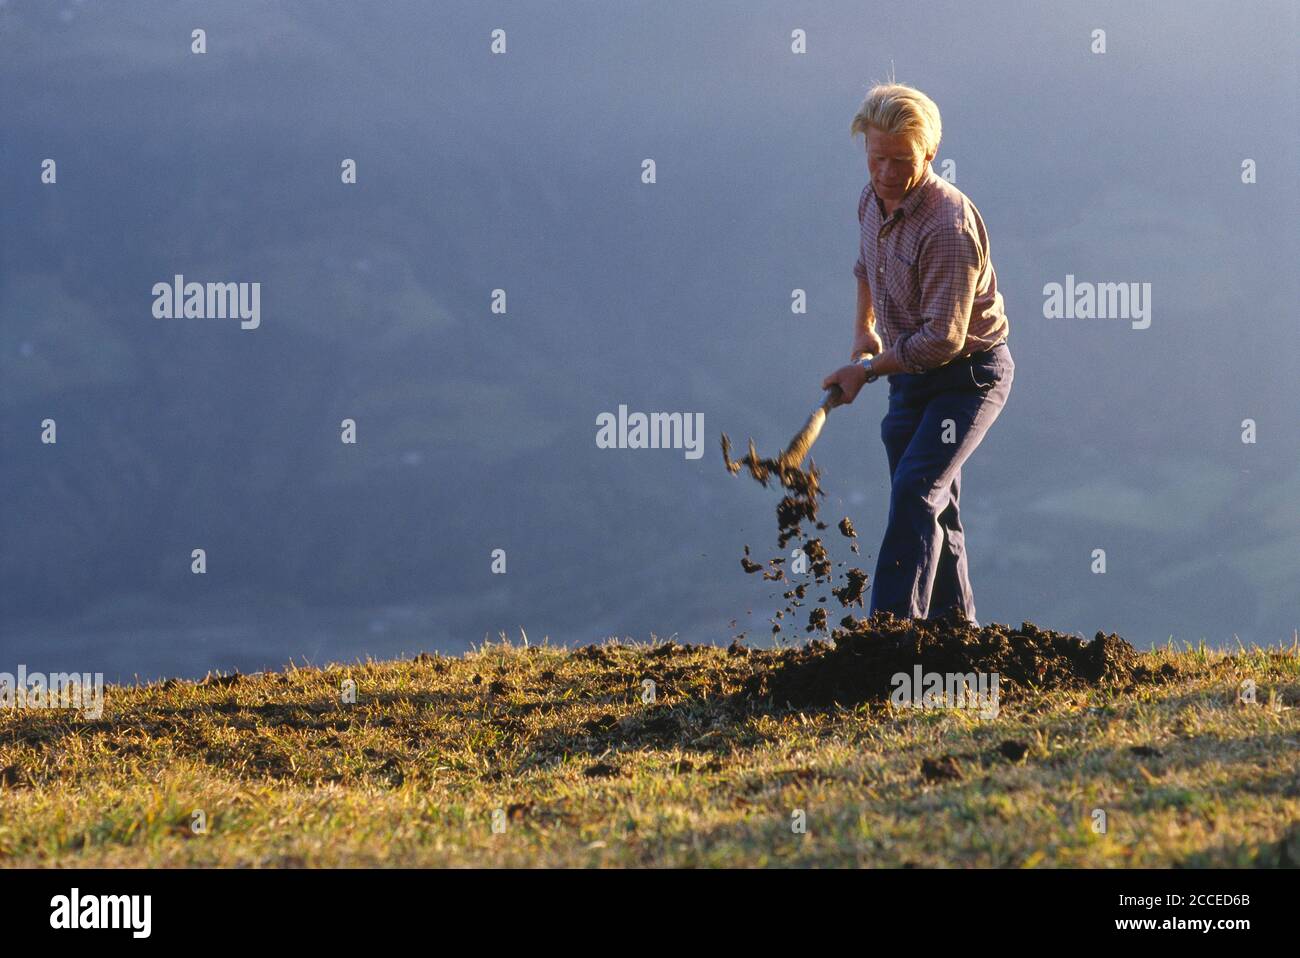 Italy, Trentino-South Tyrol, Alto Adige, Vinschgau, from old life, mountain farmers in South Tyrol, Naturnser Sonnenberg, Pircher-Hof, manure spread Stock Photo